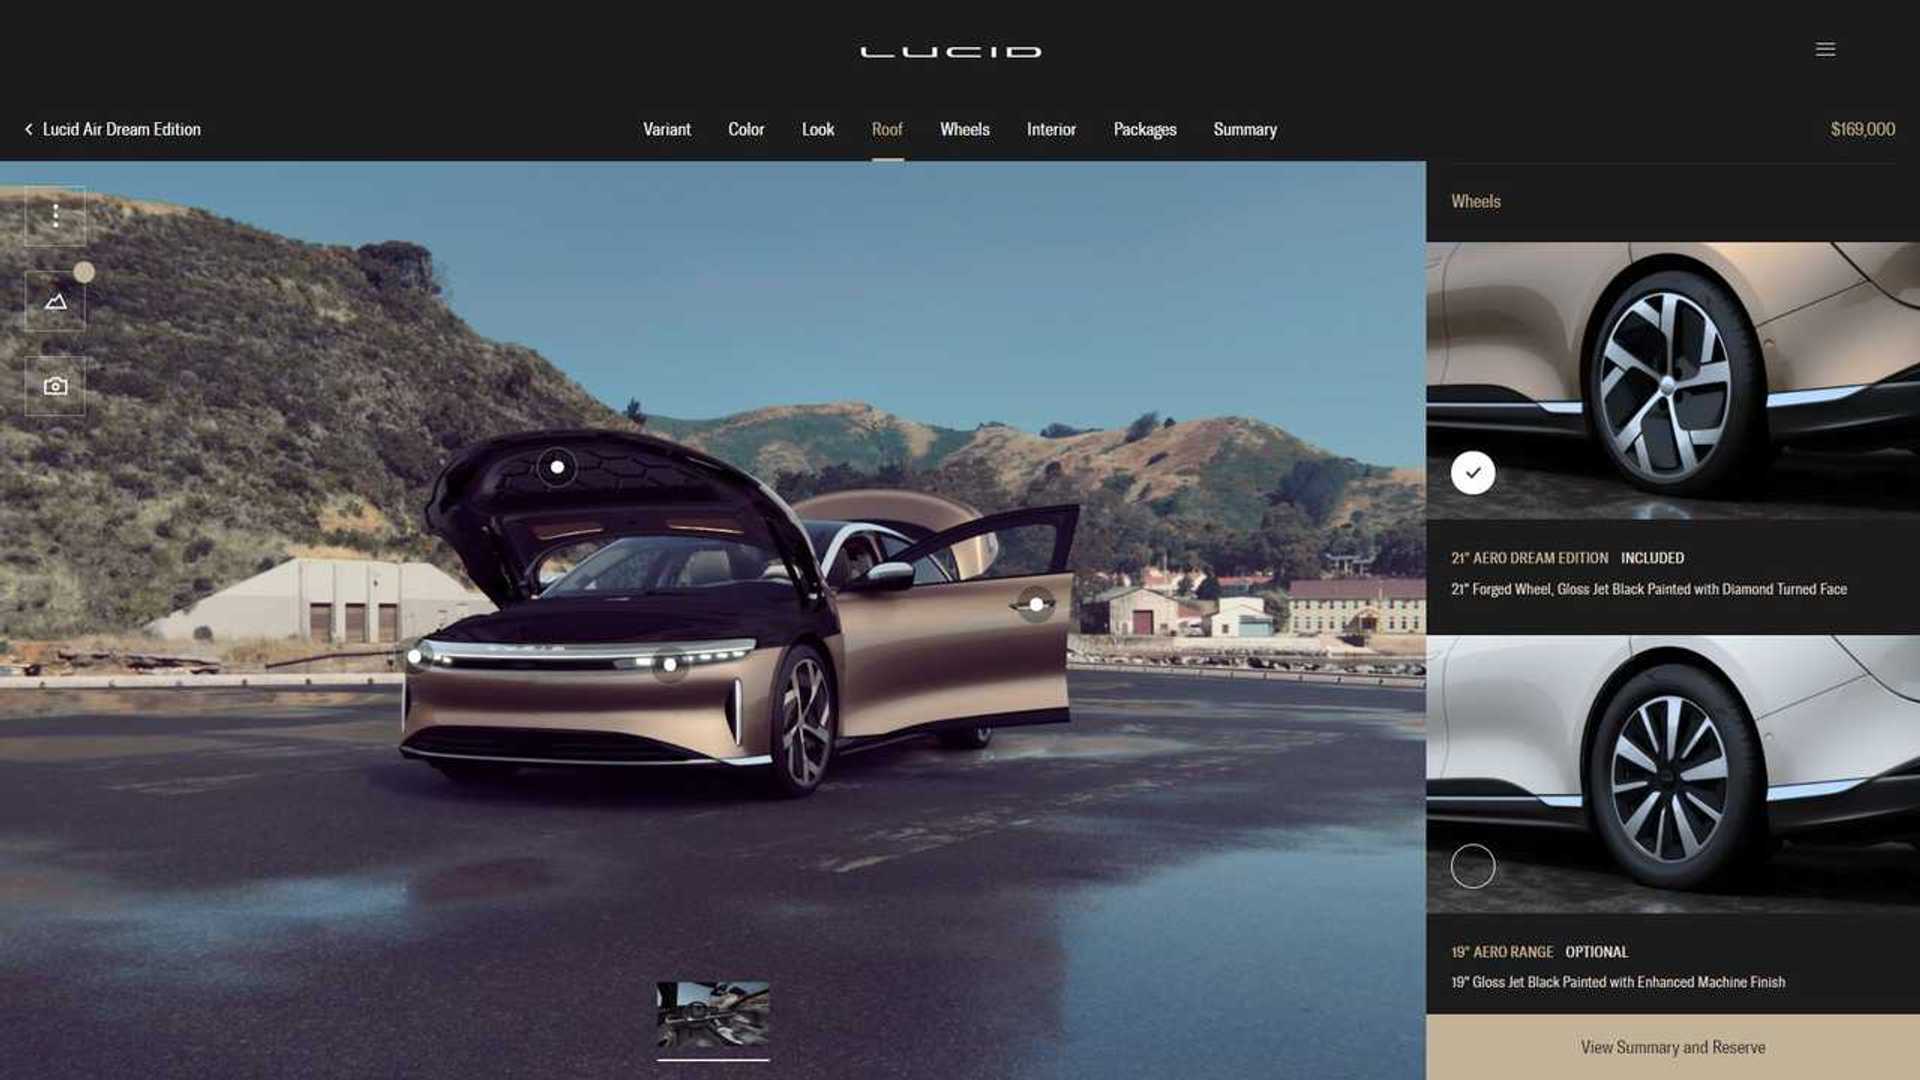 lucid-air-s-configurator-does-not-reveal-packages-pricing.jpg